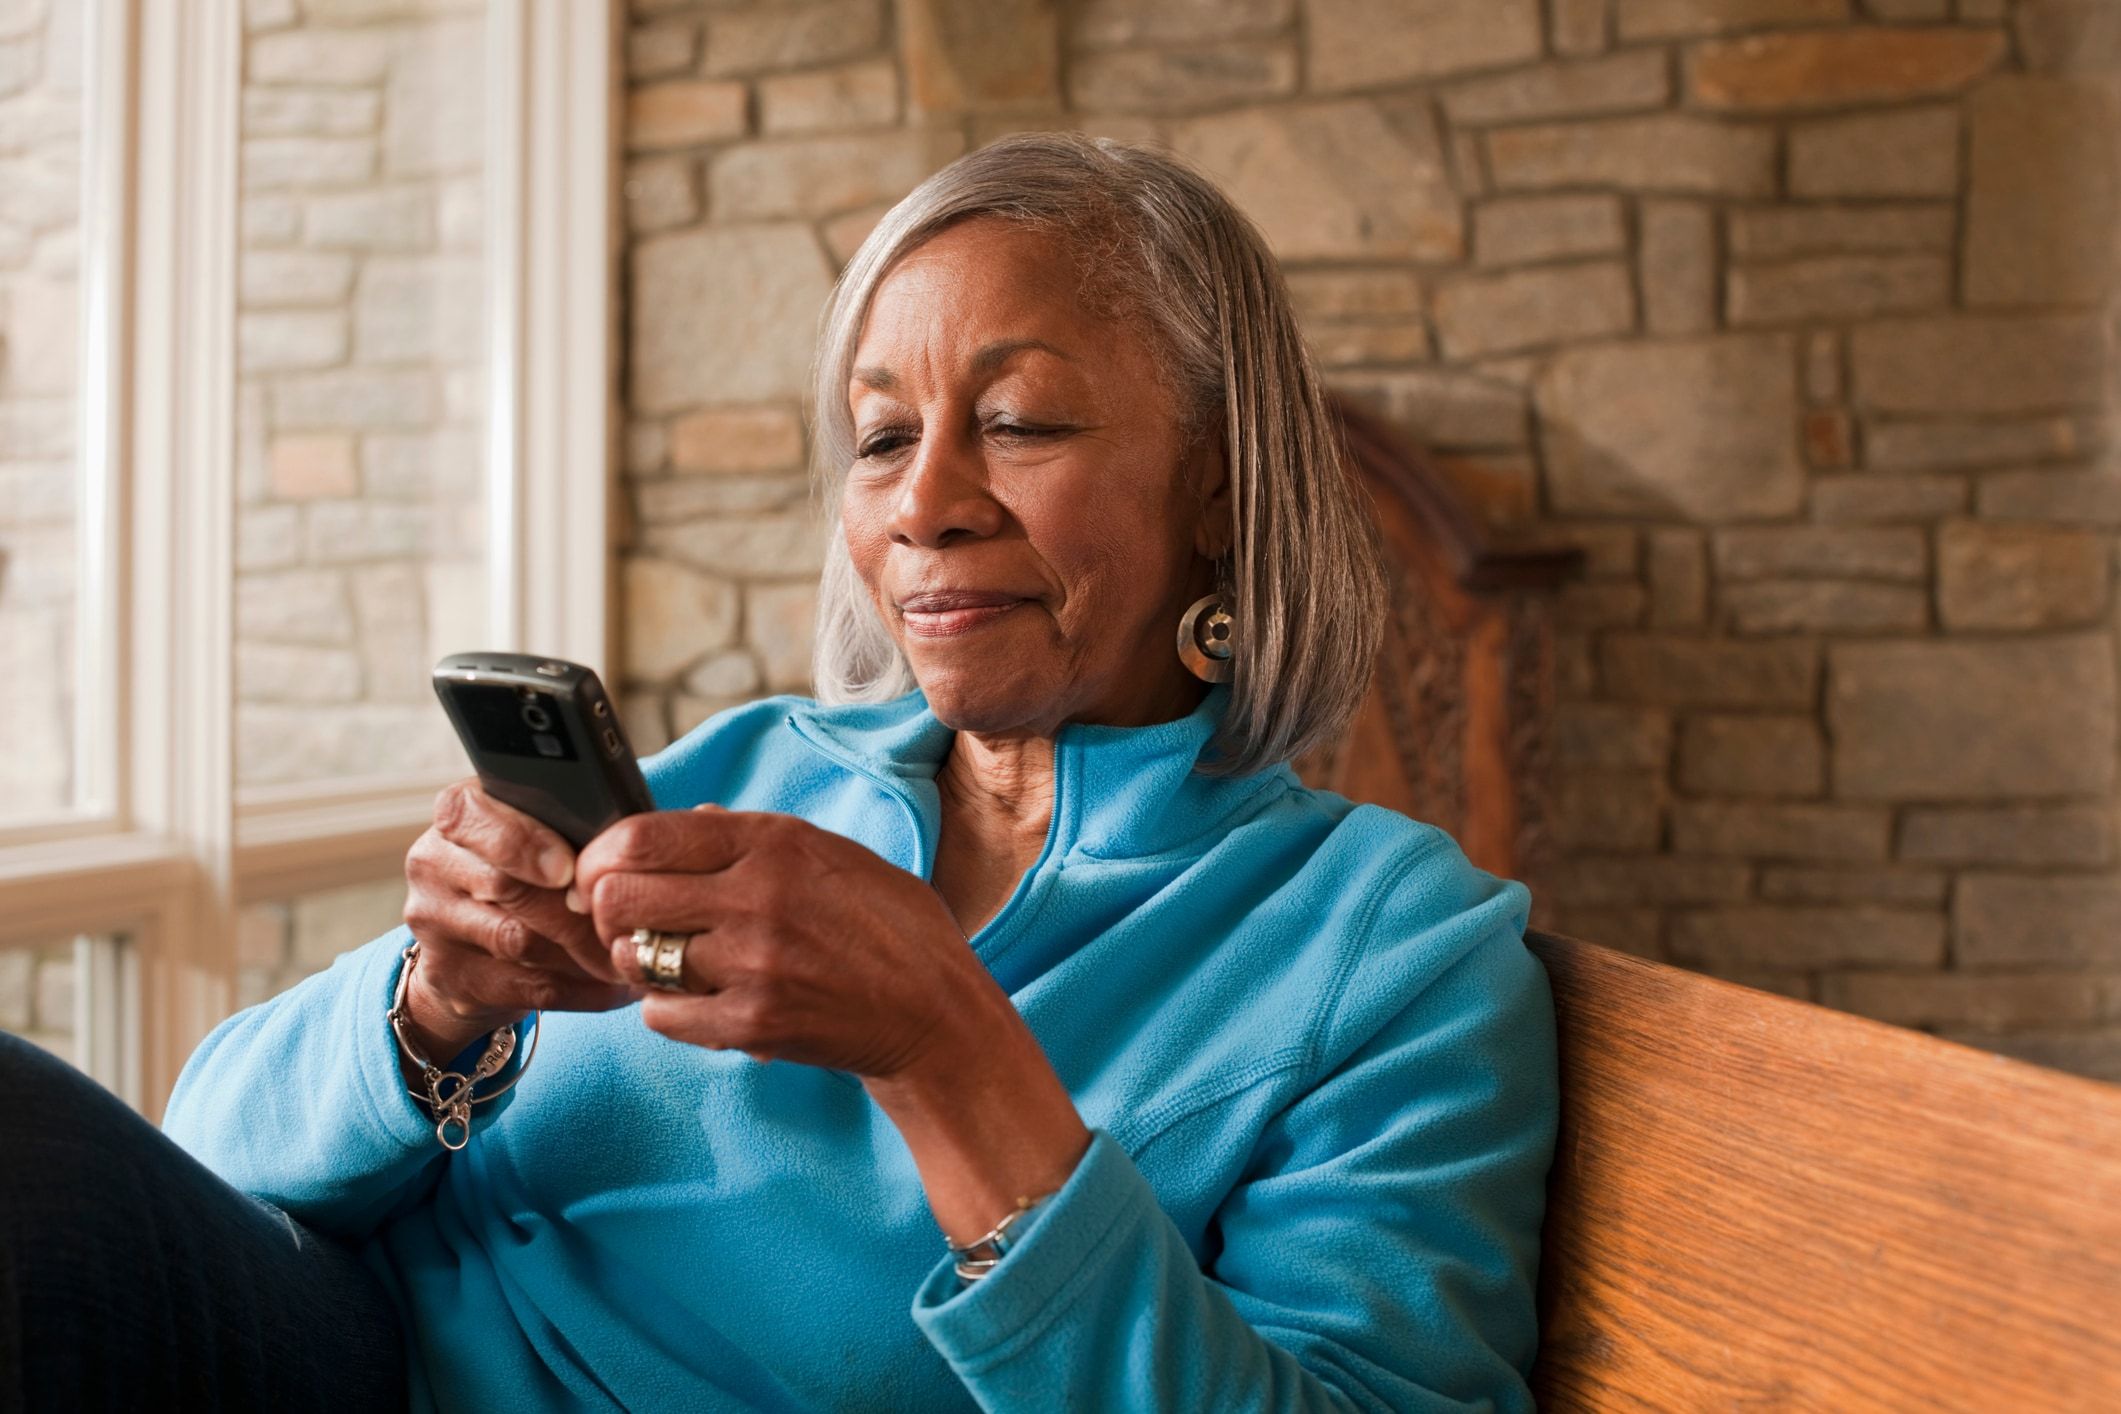 7 new tech devices for that help seniors live happier, healthier lives